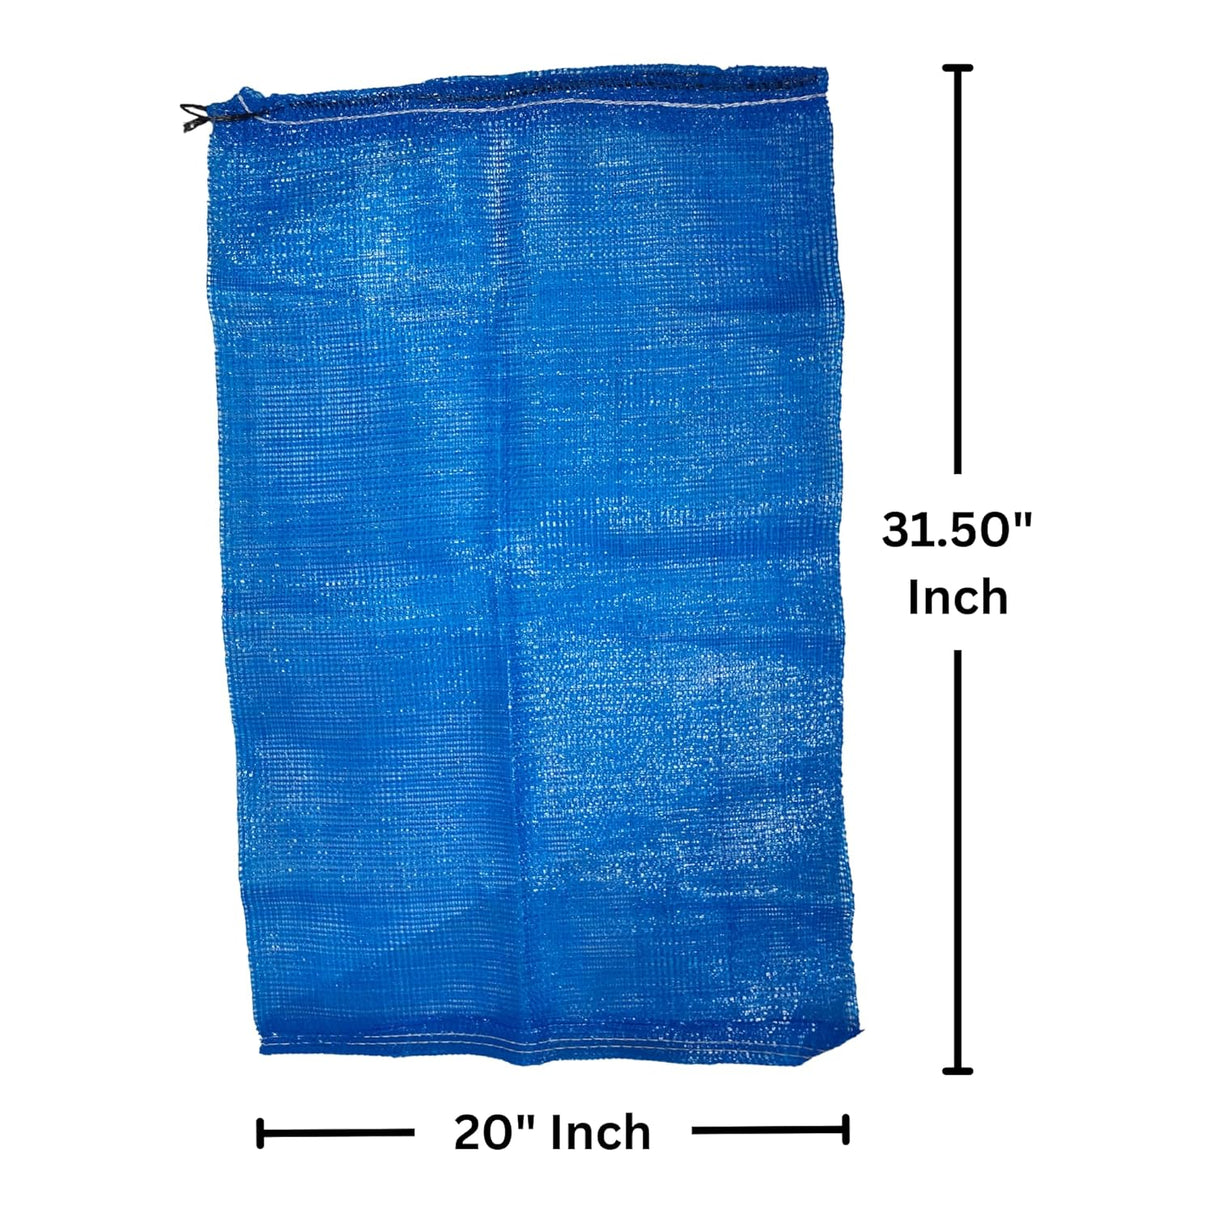 SINGHAL Mesh Onion Produce Bags with Drawstring | 20 Inch x 31.50 Inch Bags | Reusable Breathable Leno PP Fabric | Great for Packaging Produce, Vegetables and Fruit, Blue Color (Combo Pack of 25)